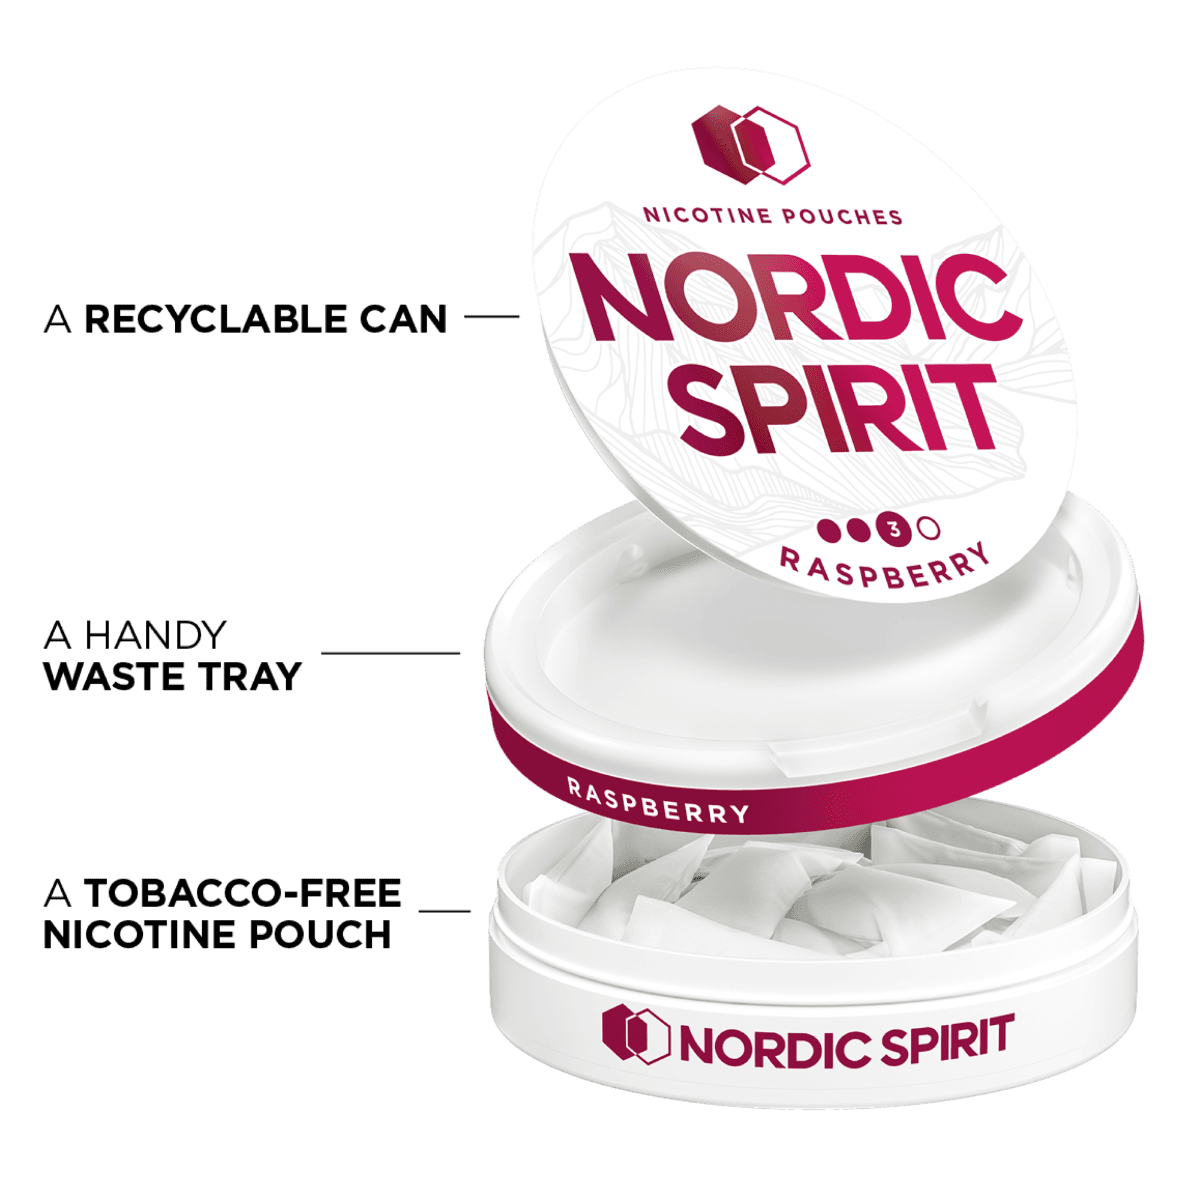 Can of Nordic Spirit Raspberry Nicotine pouches in a strong strength, it's opened showing that the can contains nicotine pouches, is made of recyclable material and has a storage try for used pouches.